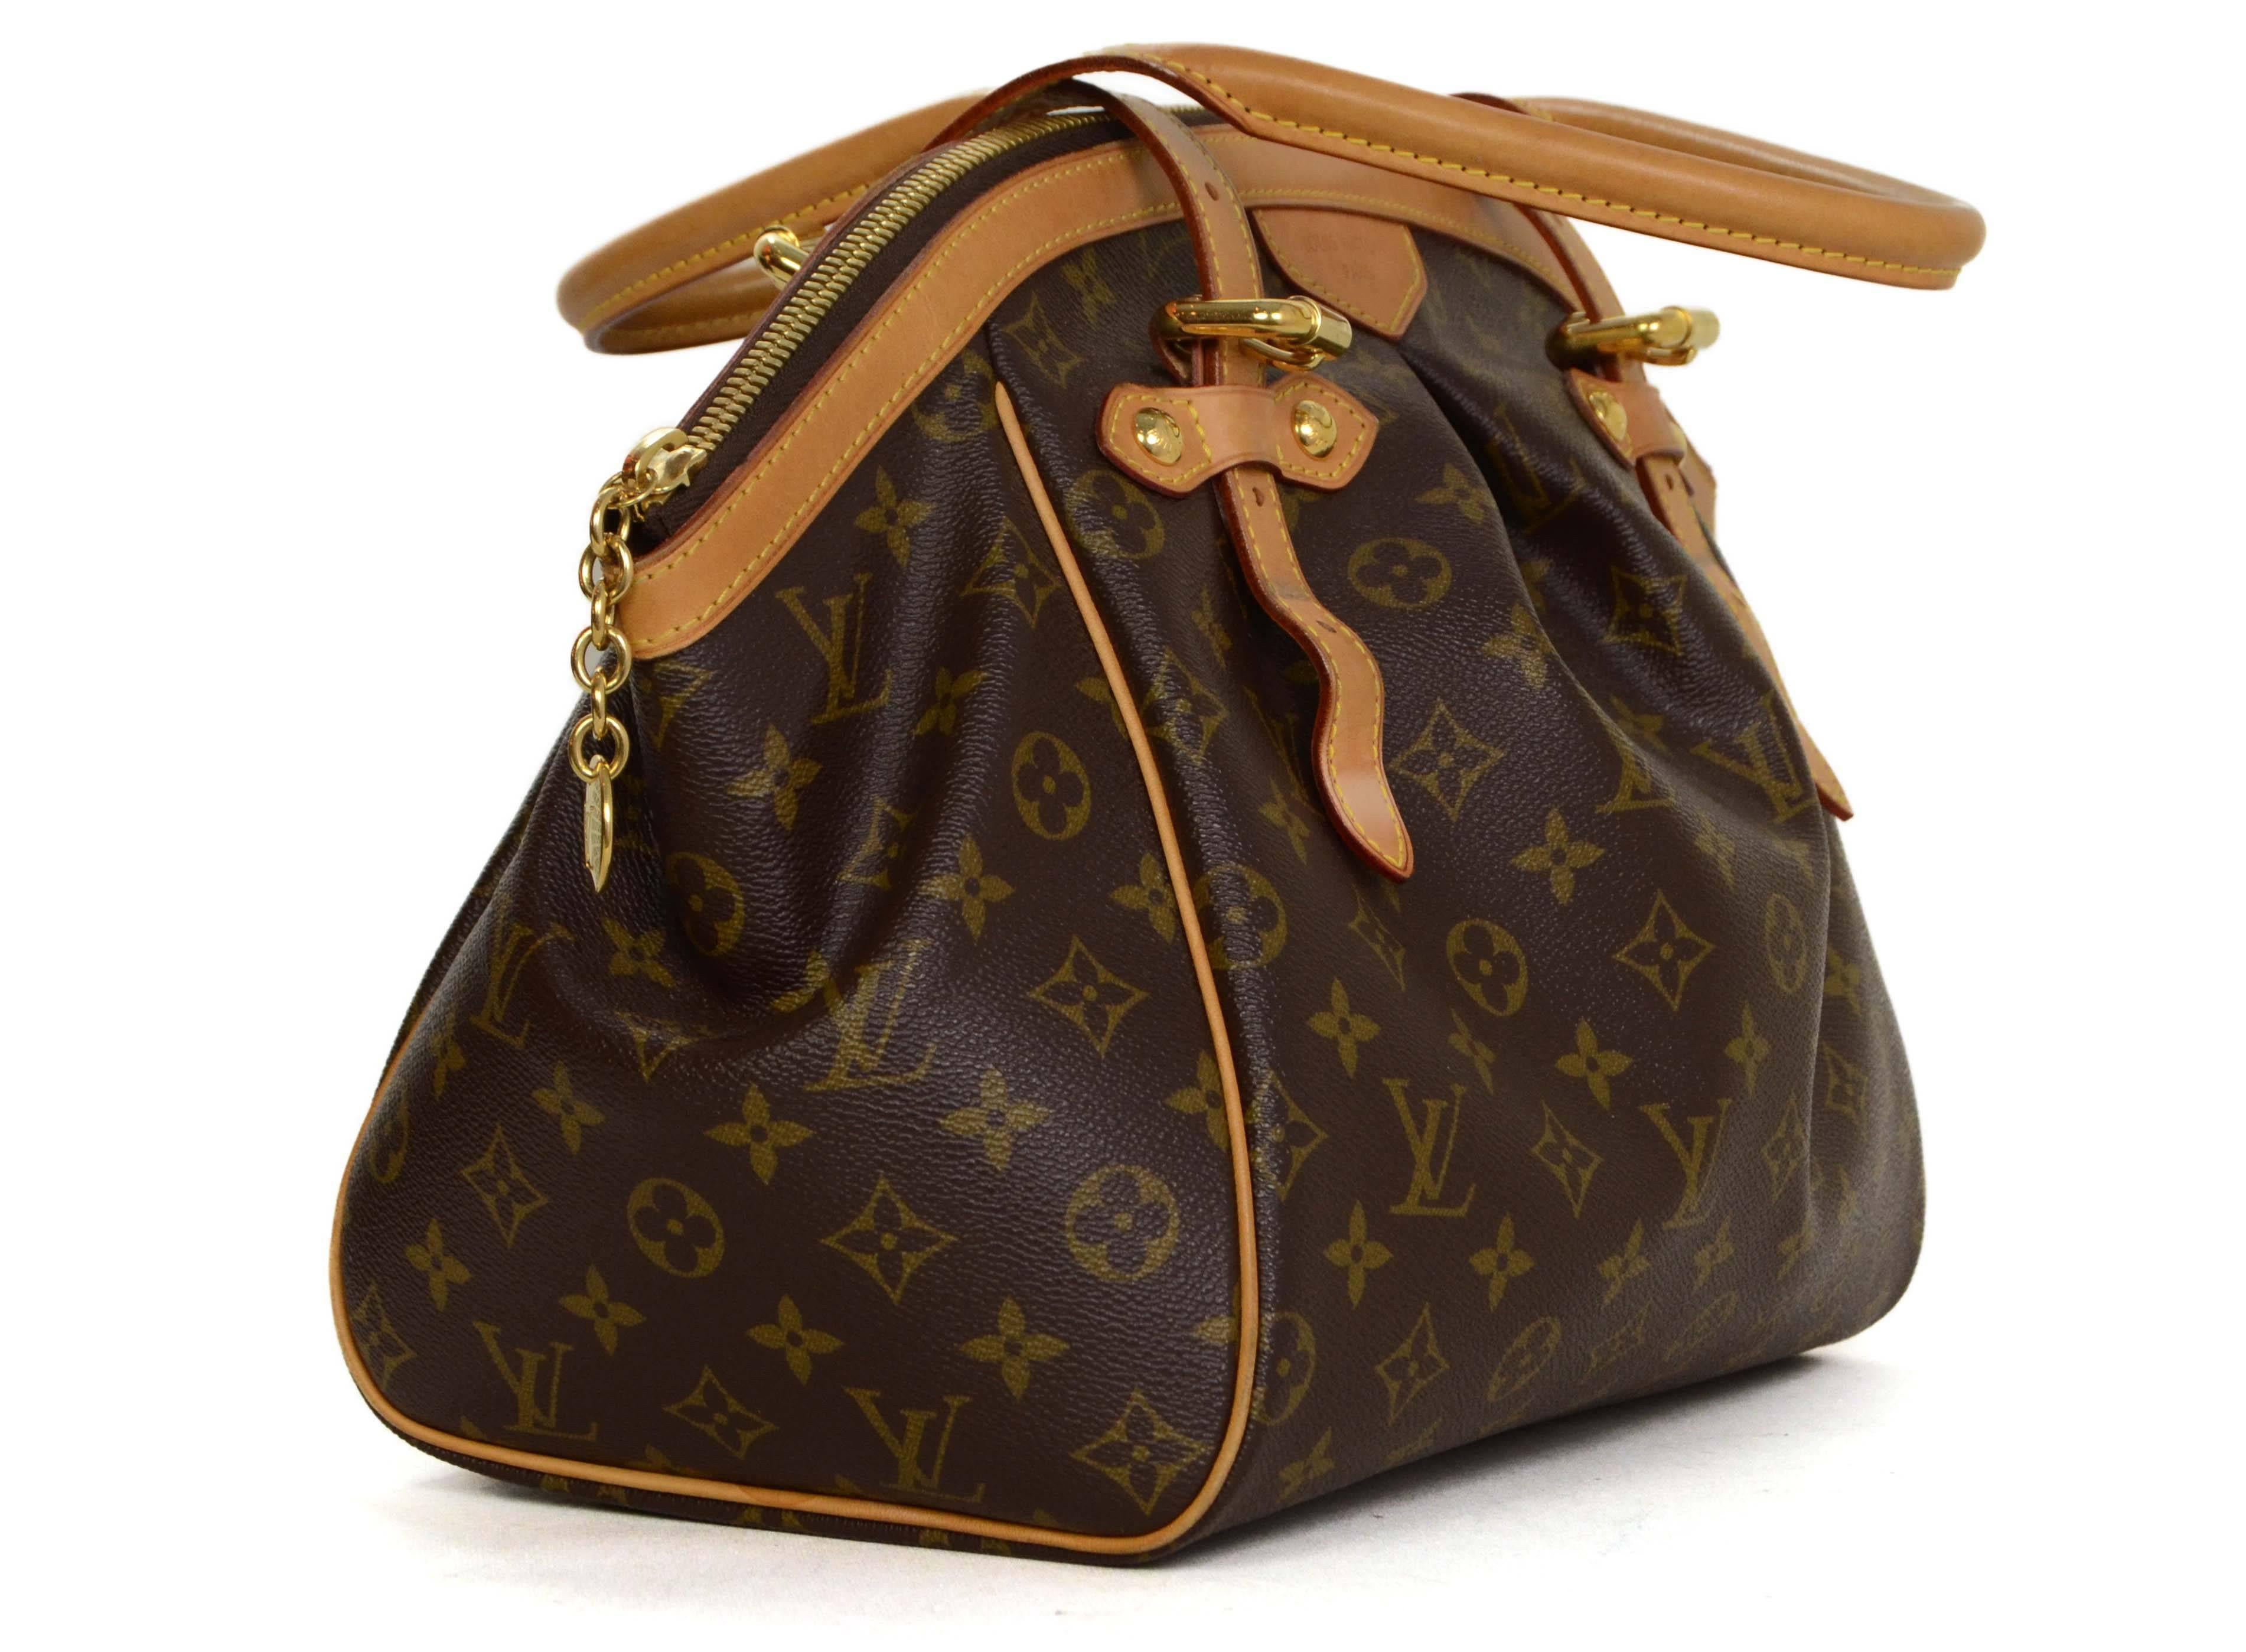 Louis Vuitton Monogram Tivoli GM Tote 
Features adjustable handles
Made In: U.S.A
Year of Production: 2012
Color: Brown and tan
Hardware: Goldtone
Materials: Coated canvas, leather and metal
Lining: Brown canvas
Closure/Opening: Zip around